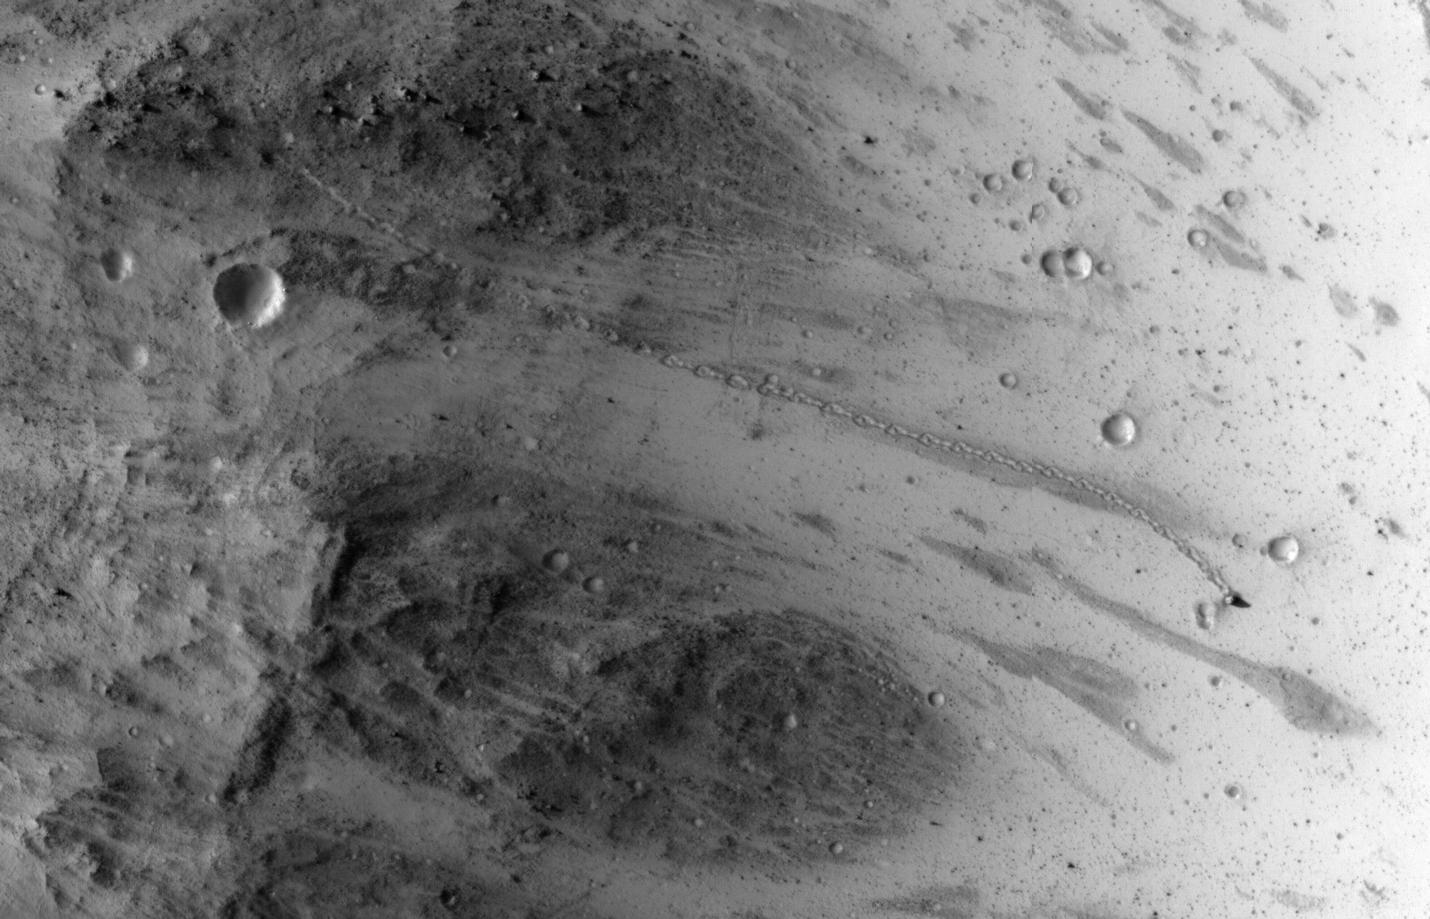 A path resembling a dotted line from the upper left to middle right of this image is the track left by an irregularly shaped, oblong boulder as it tumbled down a slope on Mars before coming to rest in an upright attitude at the downhill end of the track.